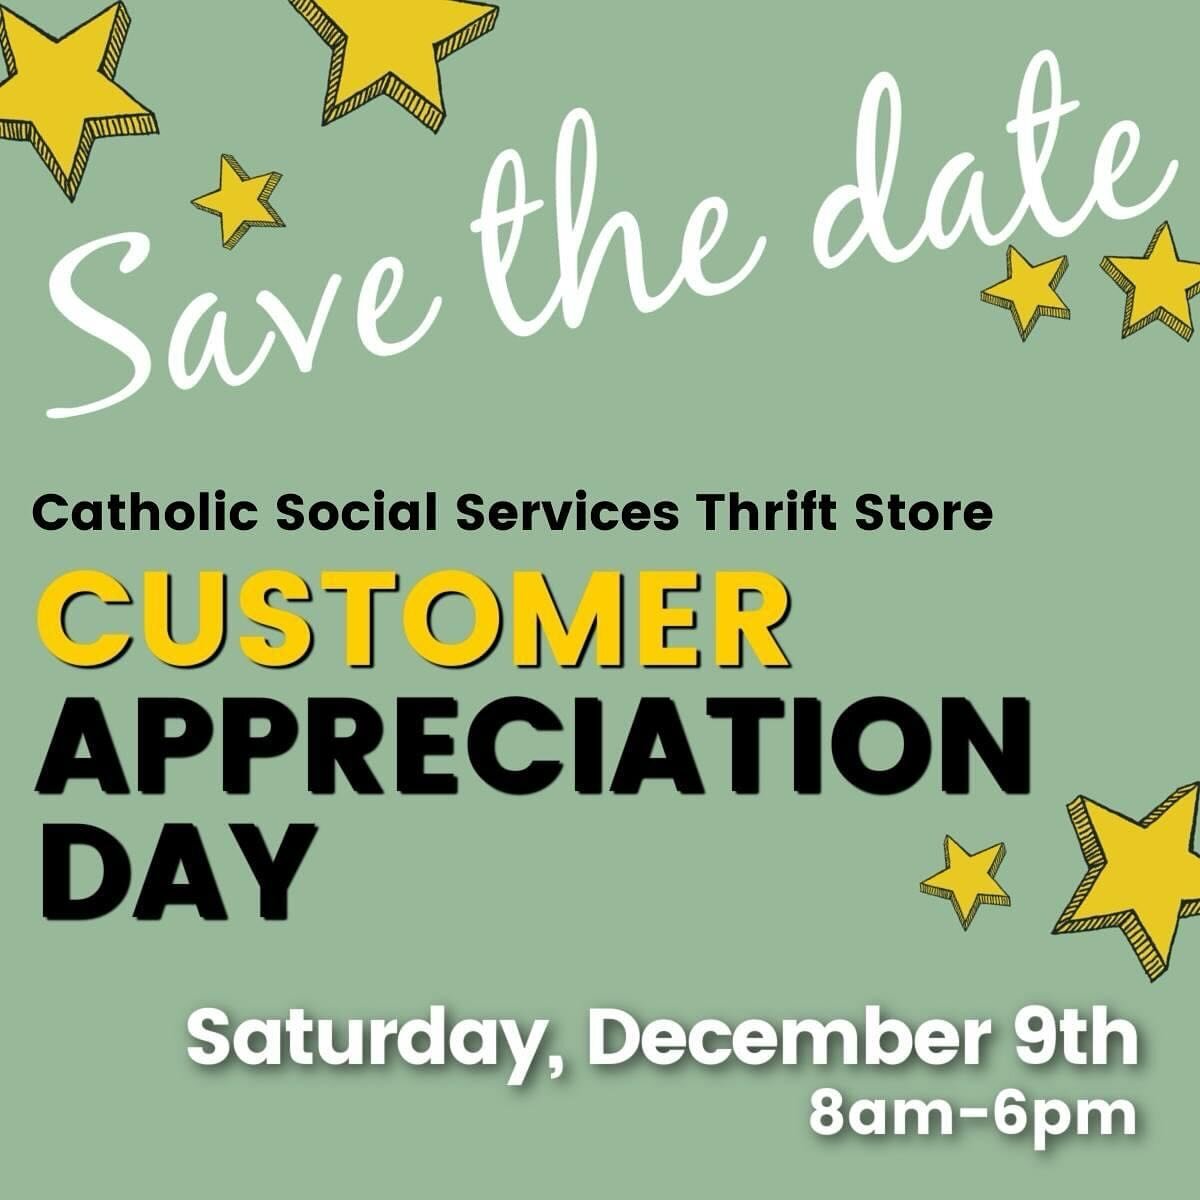 ⭐ Save the date! ⭐ Our biggest event of the year is right around the corner. Join us on Saturday, December 9th for Customer Appreciation Day. We'll have epic sales, fun giveaways, food, and a special visitor from the North Pole. Watch this space for 